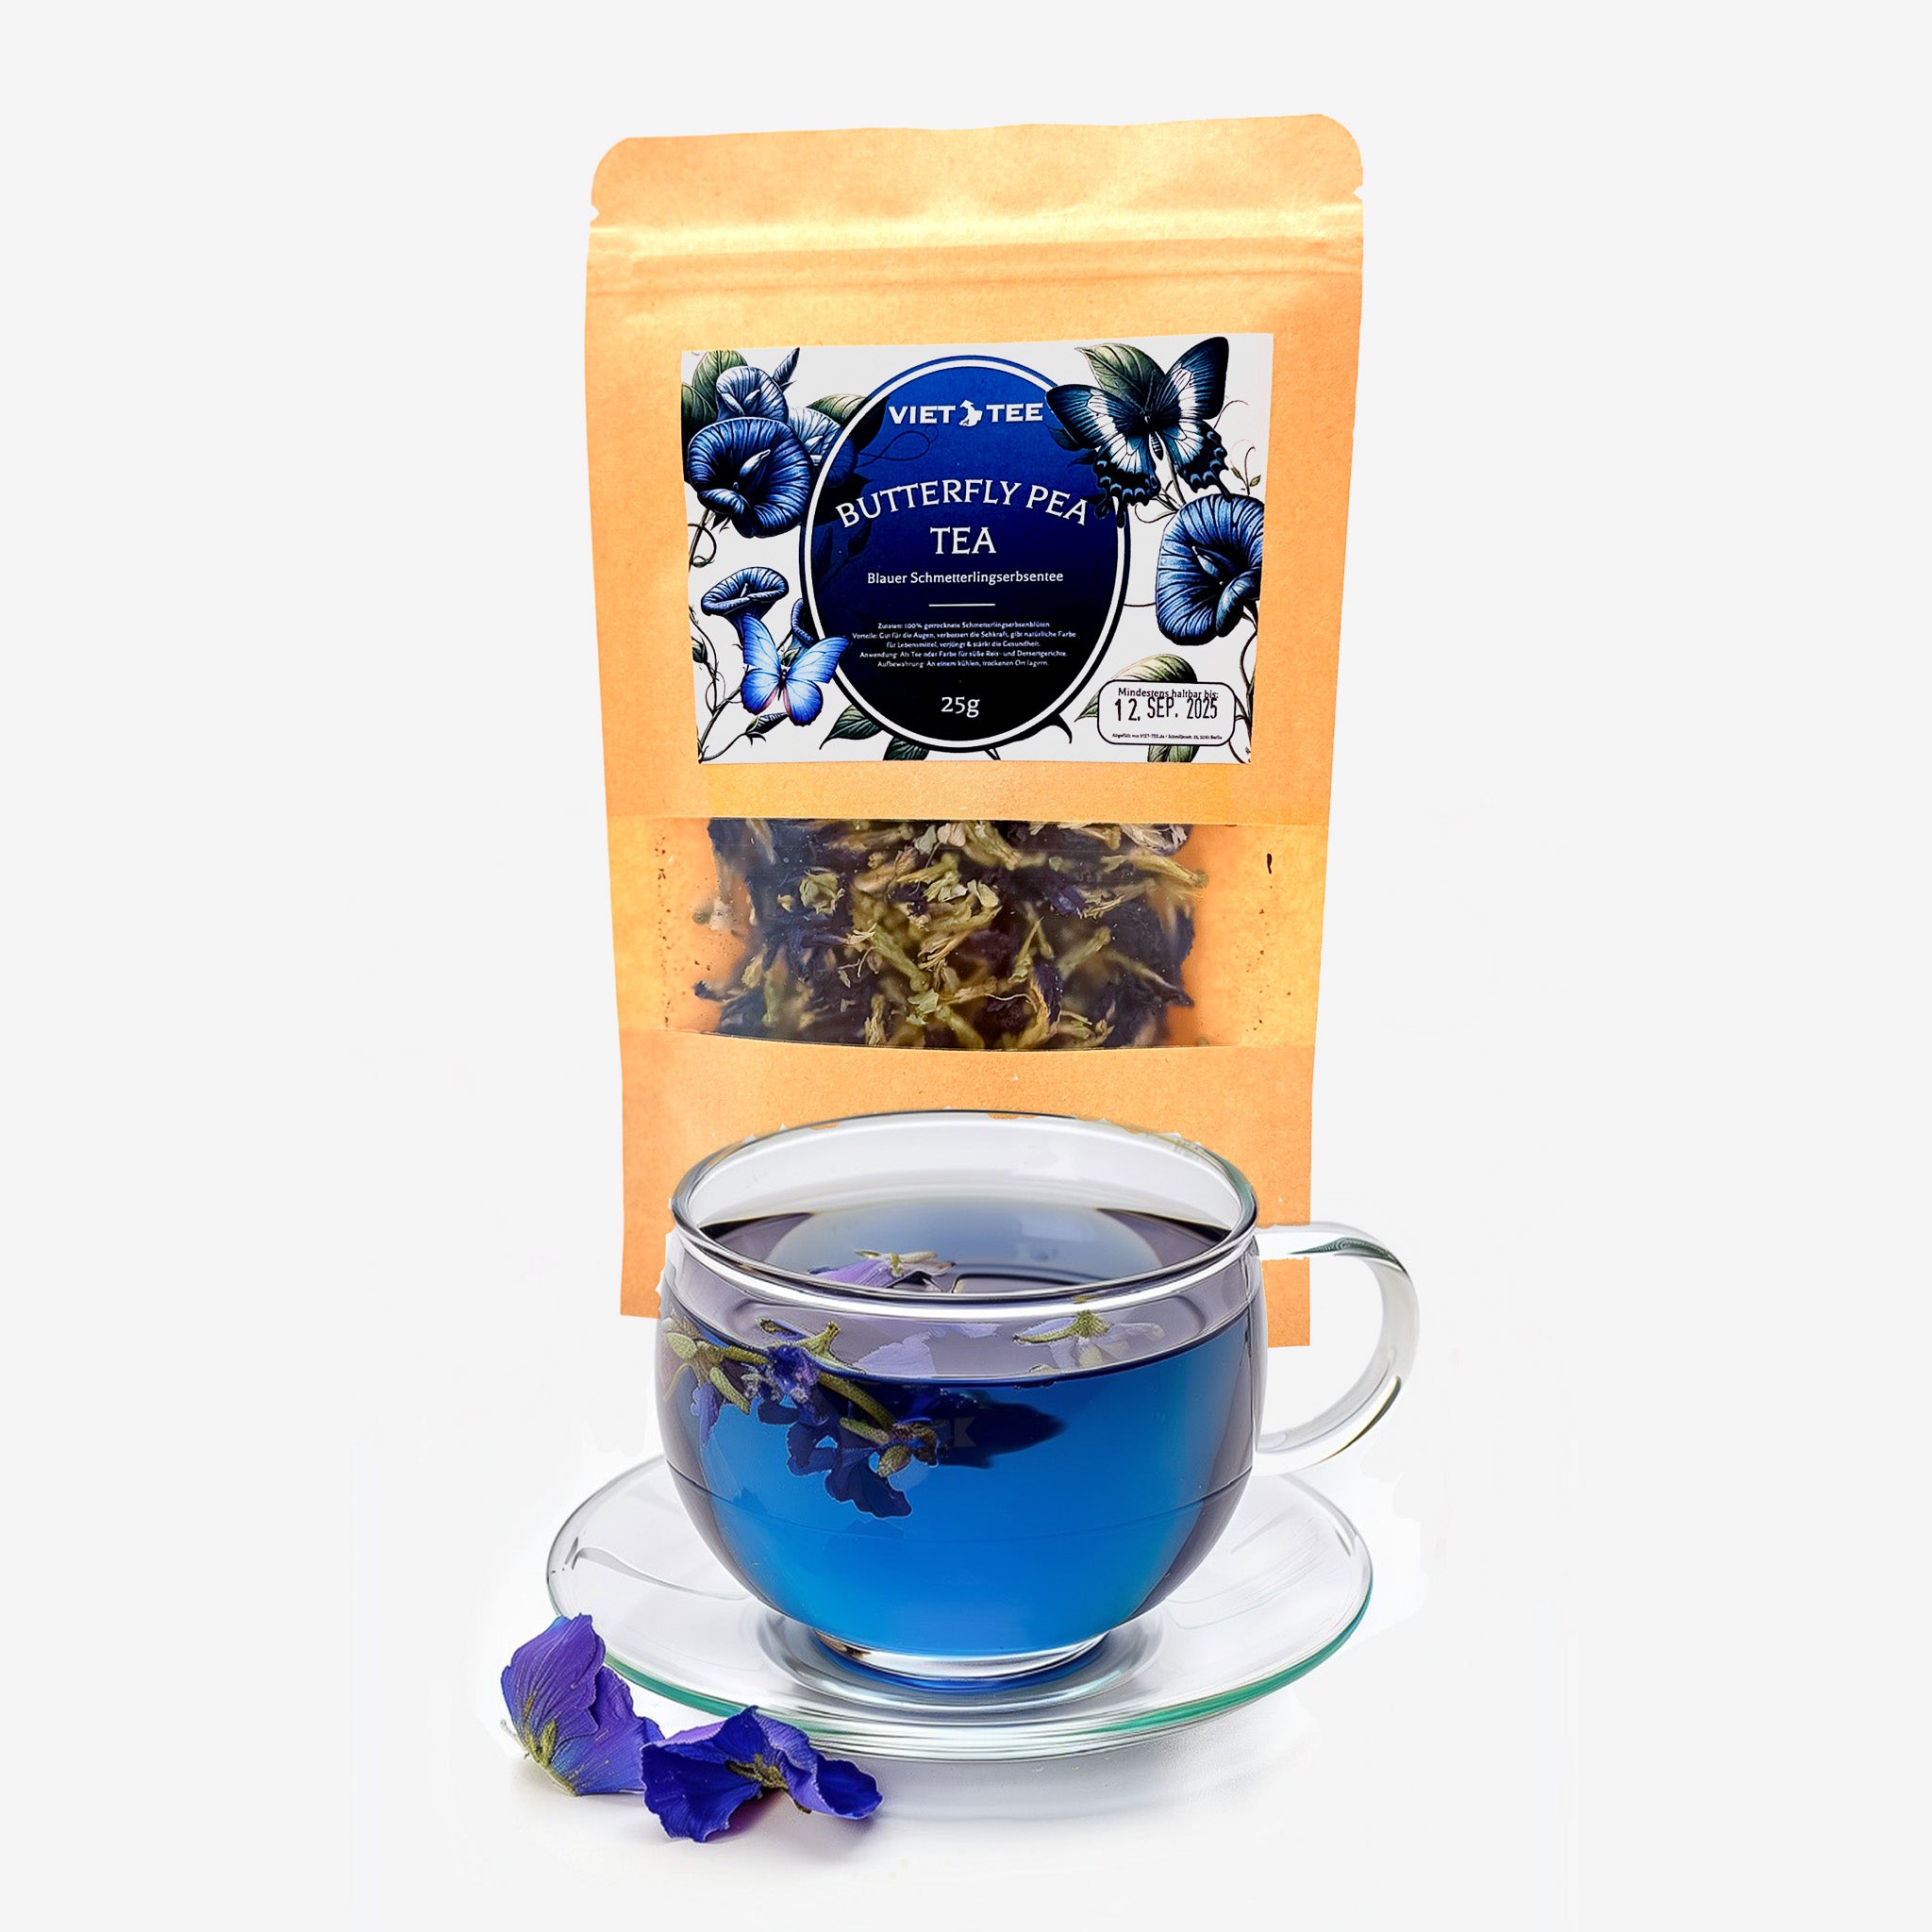 25g Butterfly Pea Tea – Butterfly Pea Tea from Vietnam: Detox, Colour Change &amp; Wellbeing